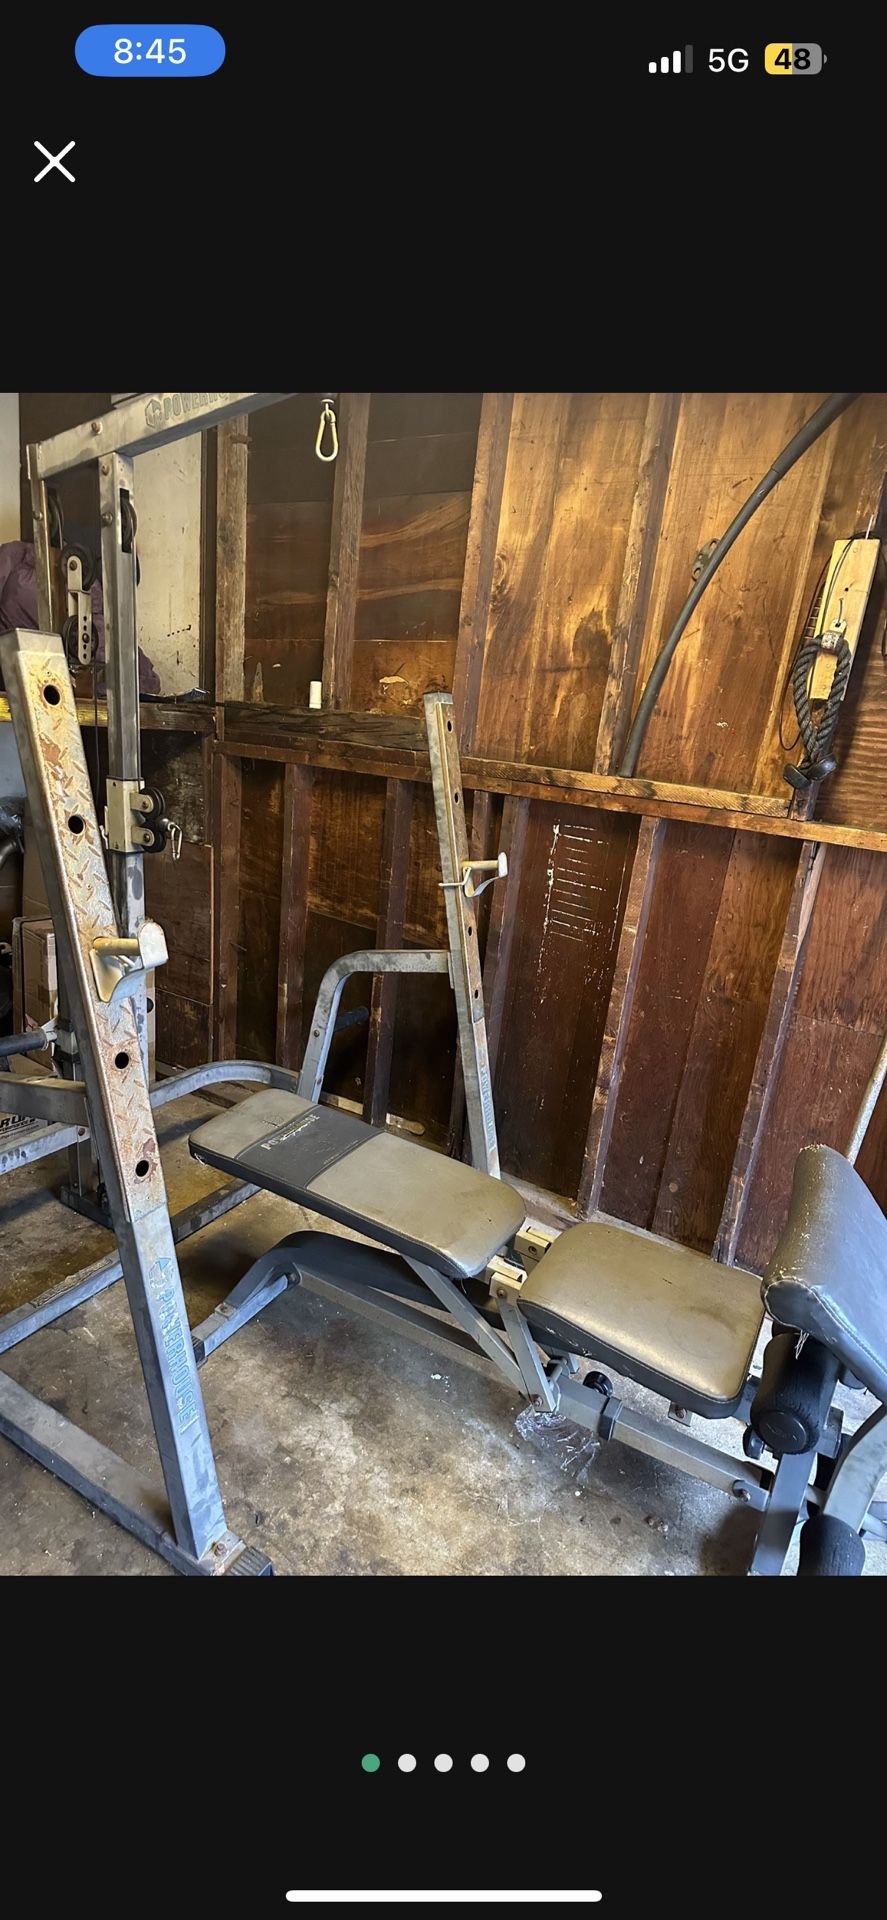 Squat Rack For Bench Press Weights (no Bench)